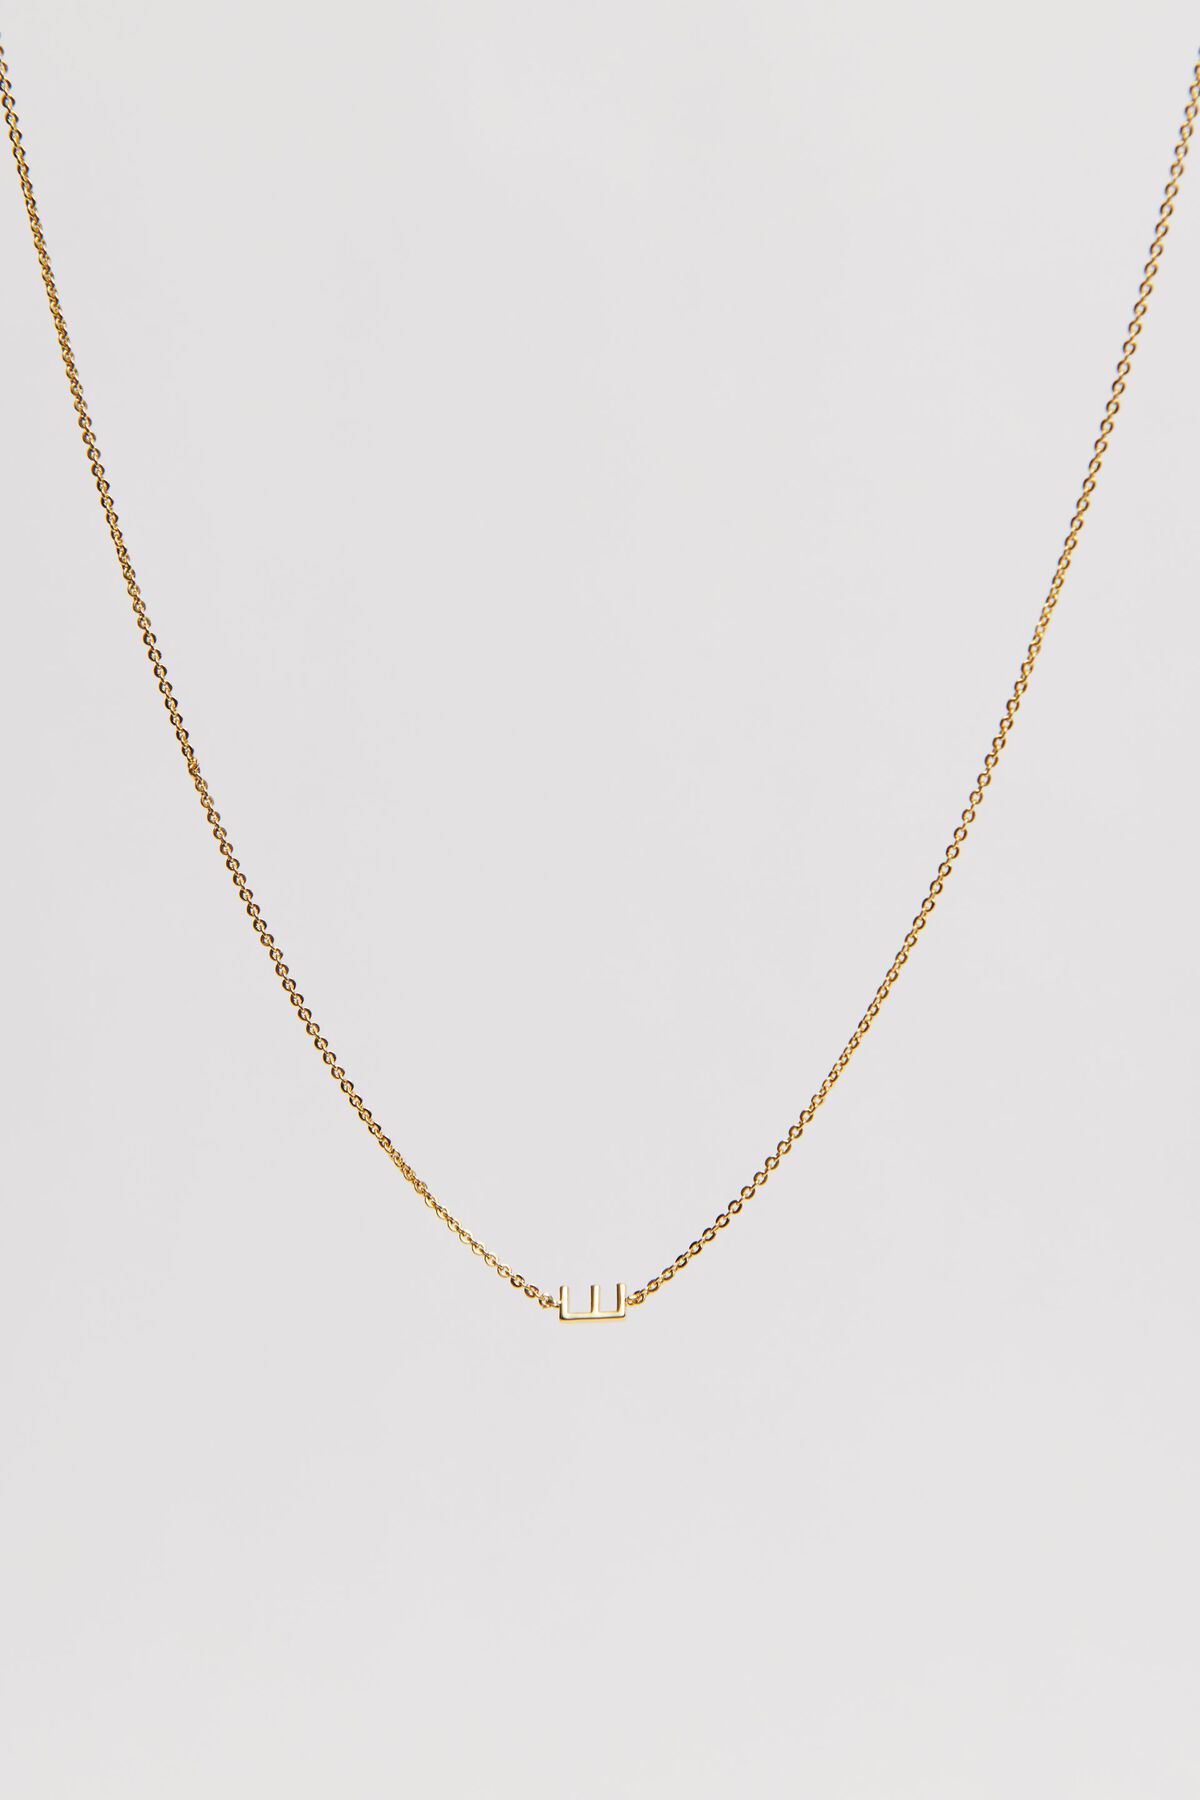 Garage 14K Gold Plated Initial Necklace. 3